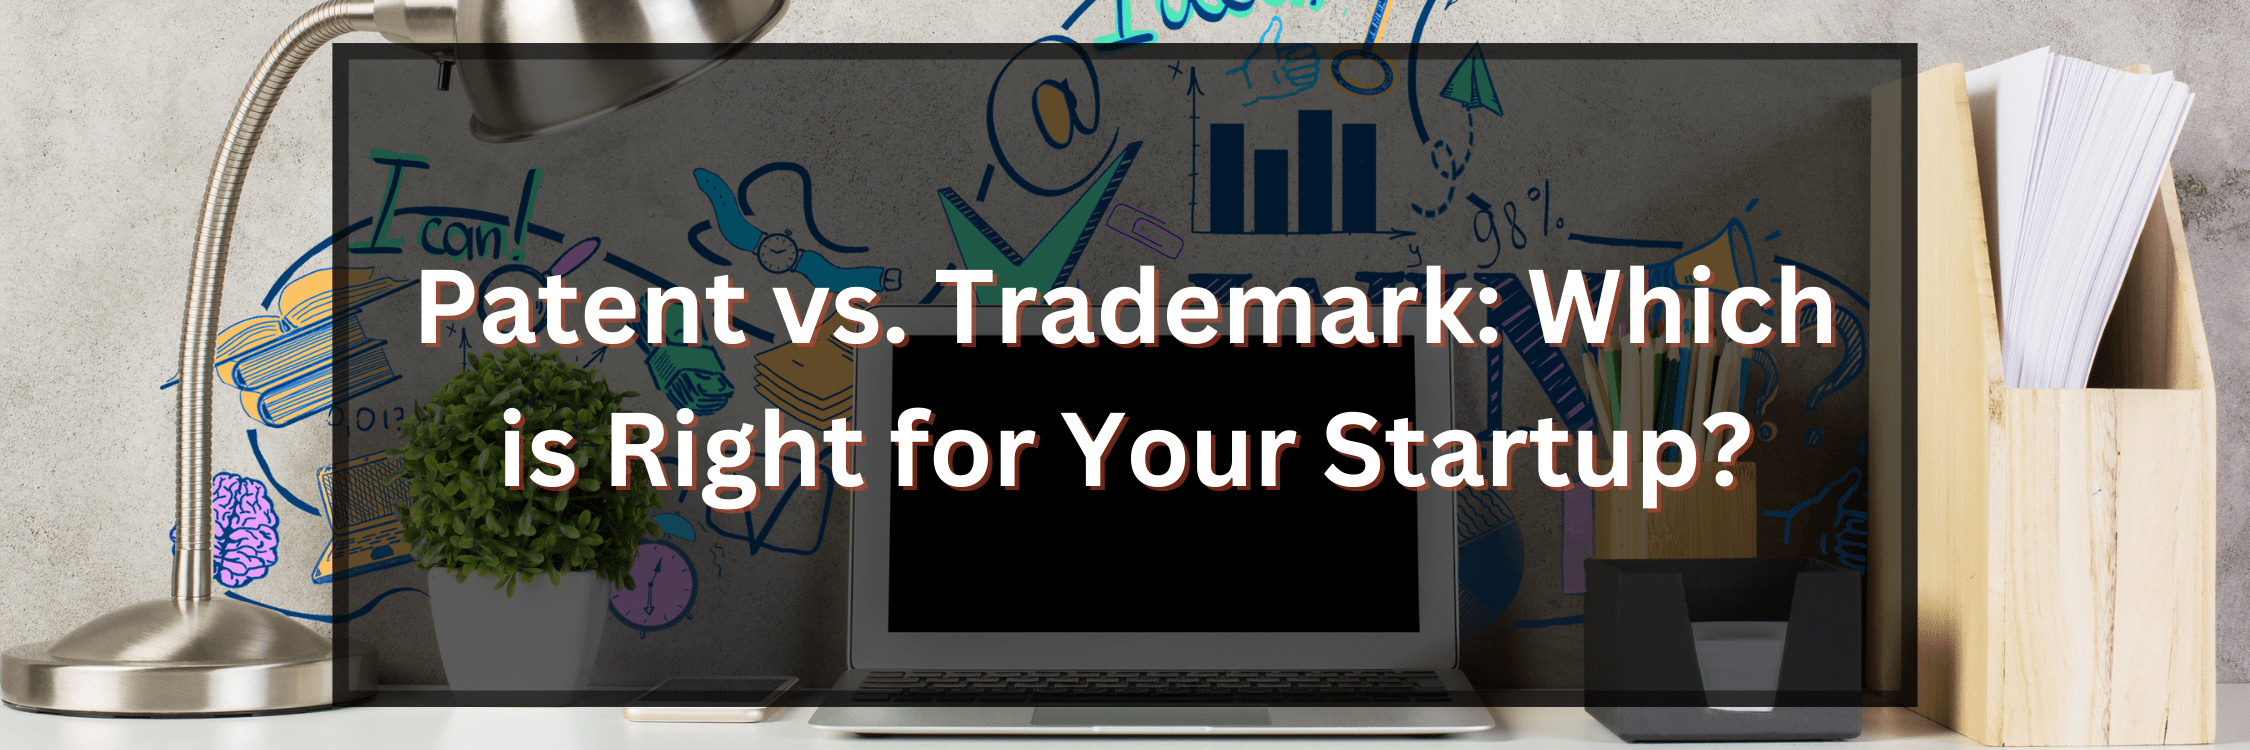 Patent vs. Trademark: Which is Right for Your Startup?